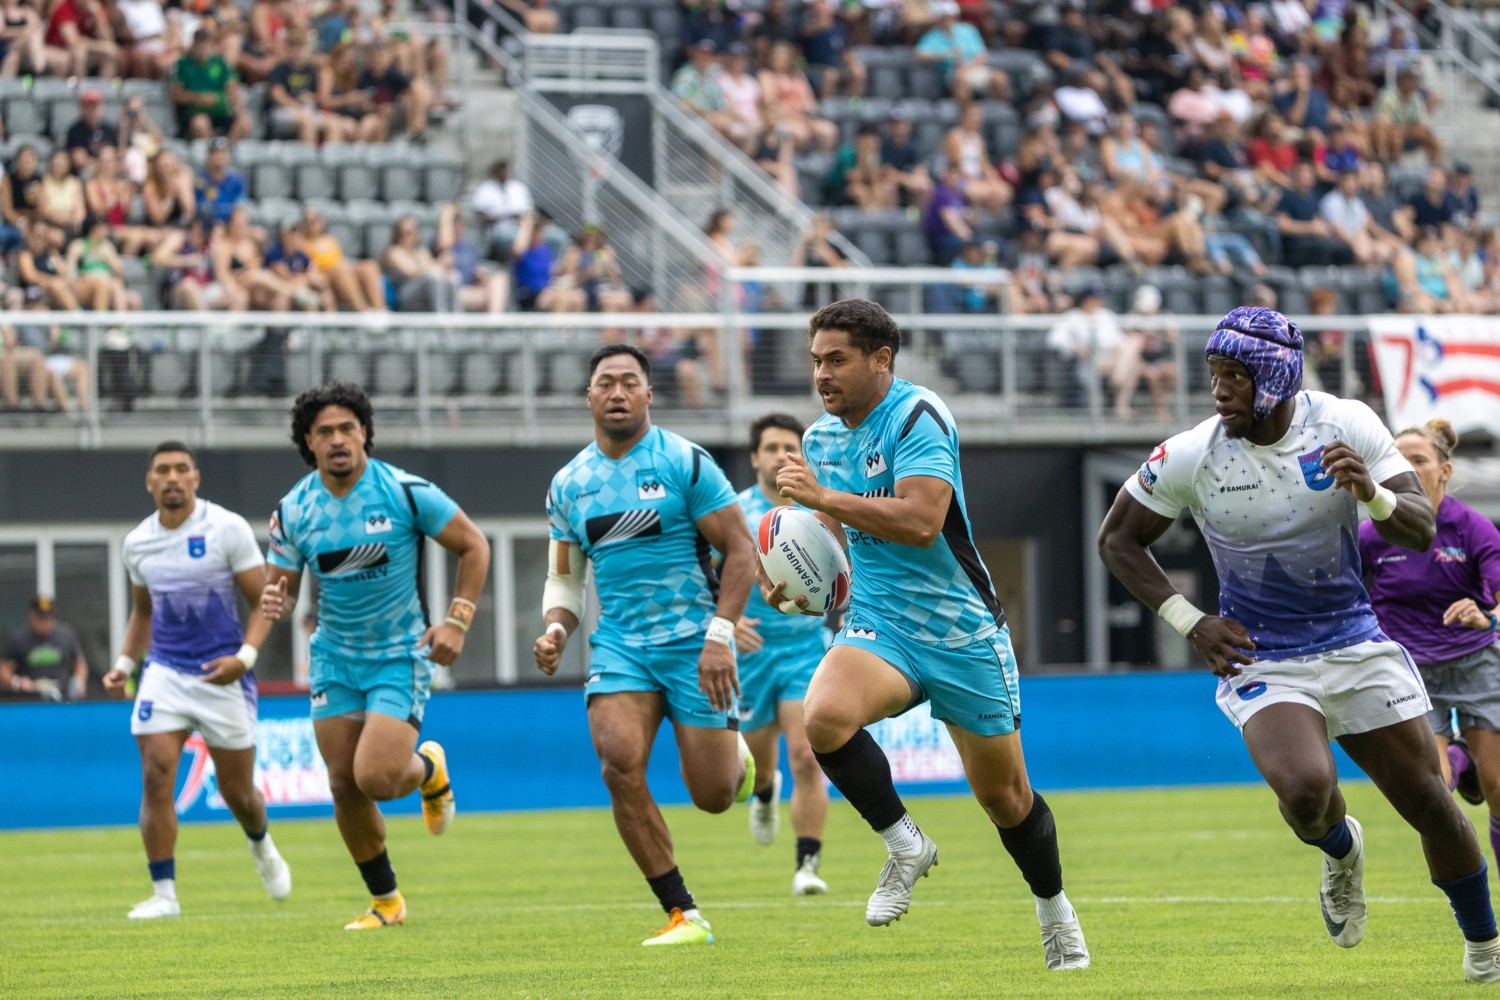 Premier Rugby Sevens Expands, Regionalizes in Bid to Grow Sport